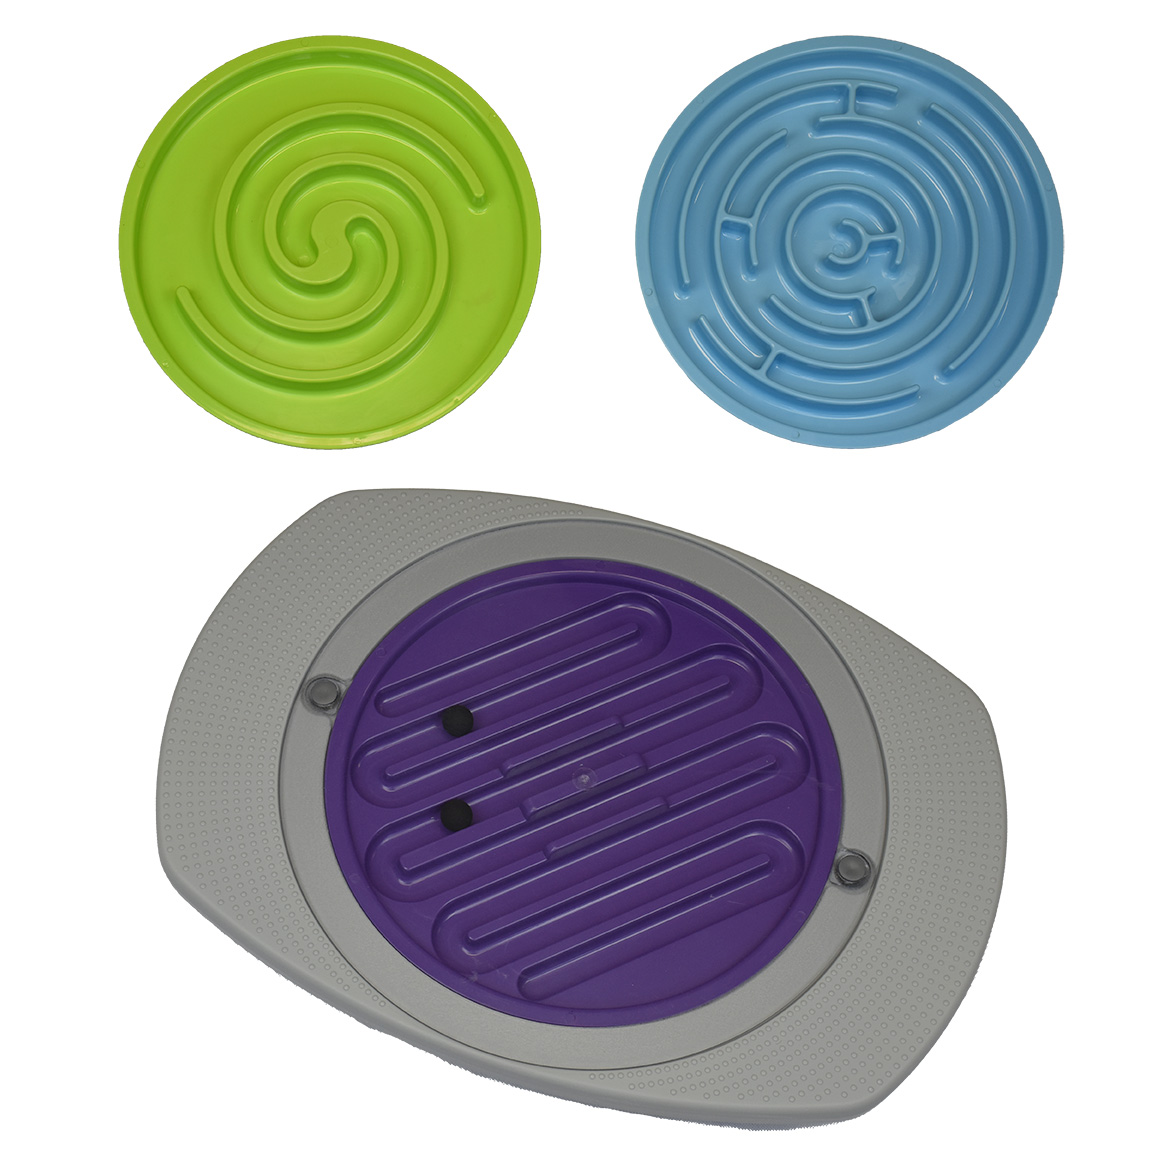 Balance board with removable inserts